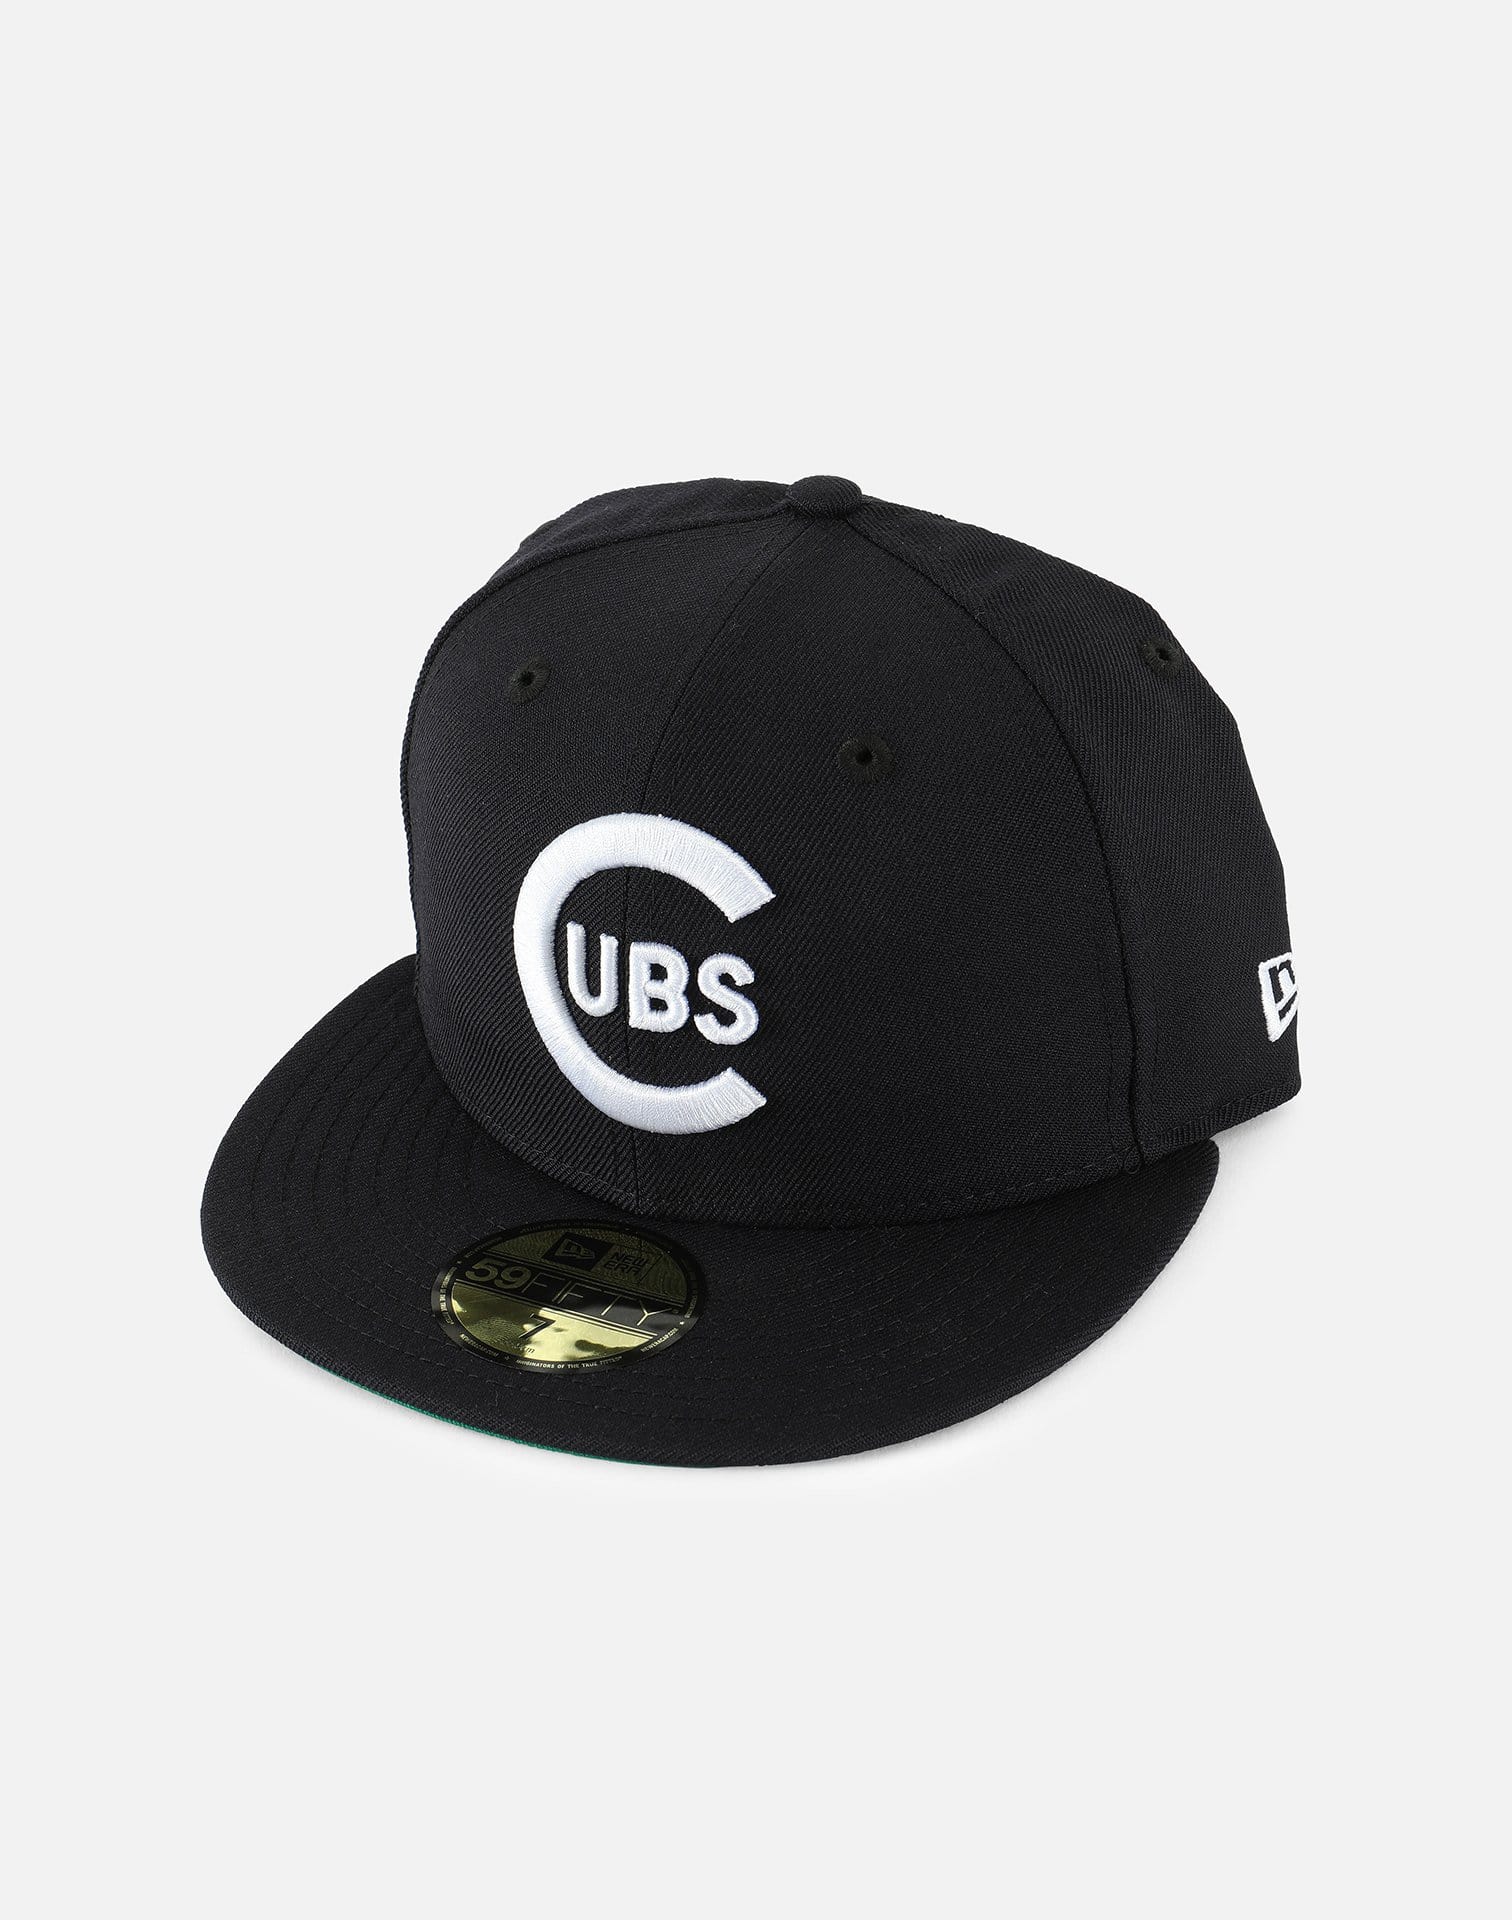 New Era 59FIFTY MLB CHICAGO CUBS FITTED HAT